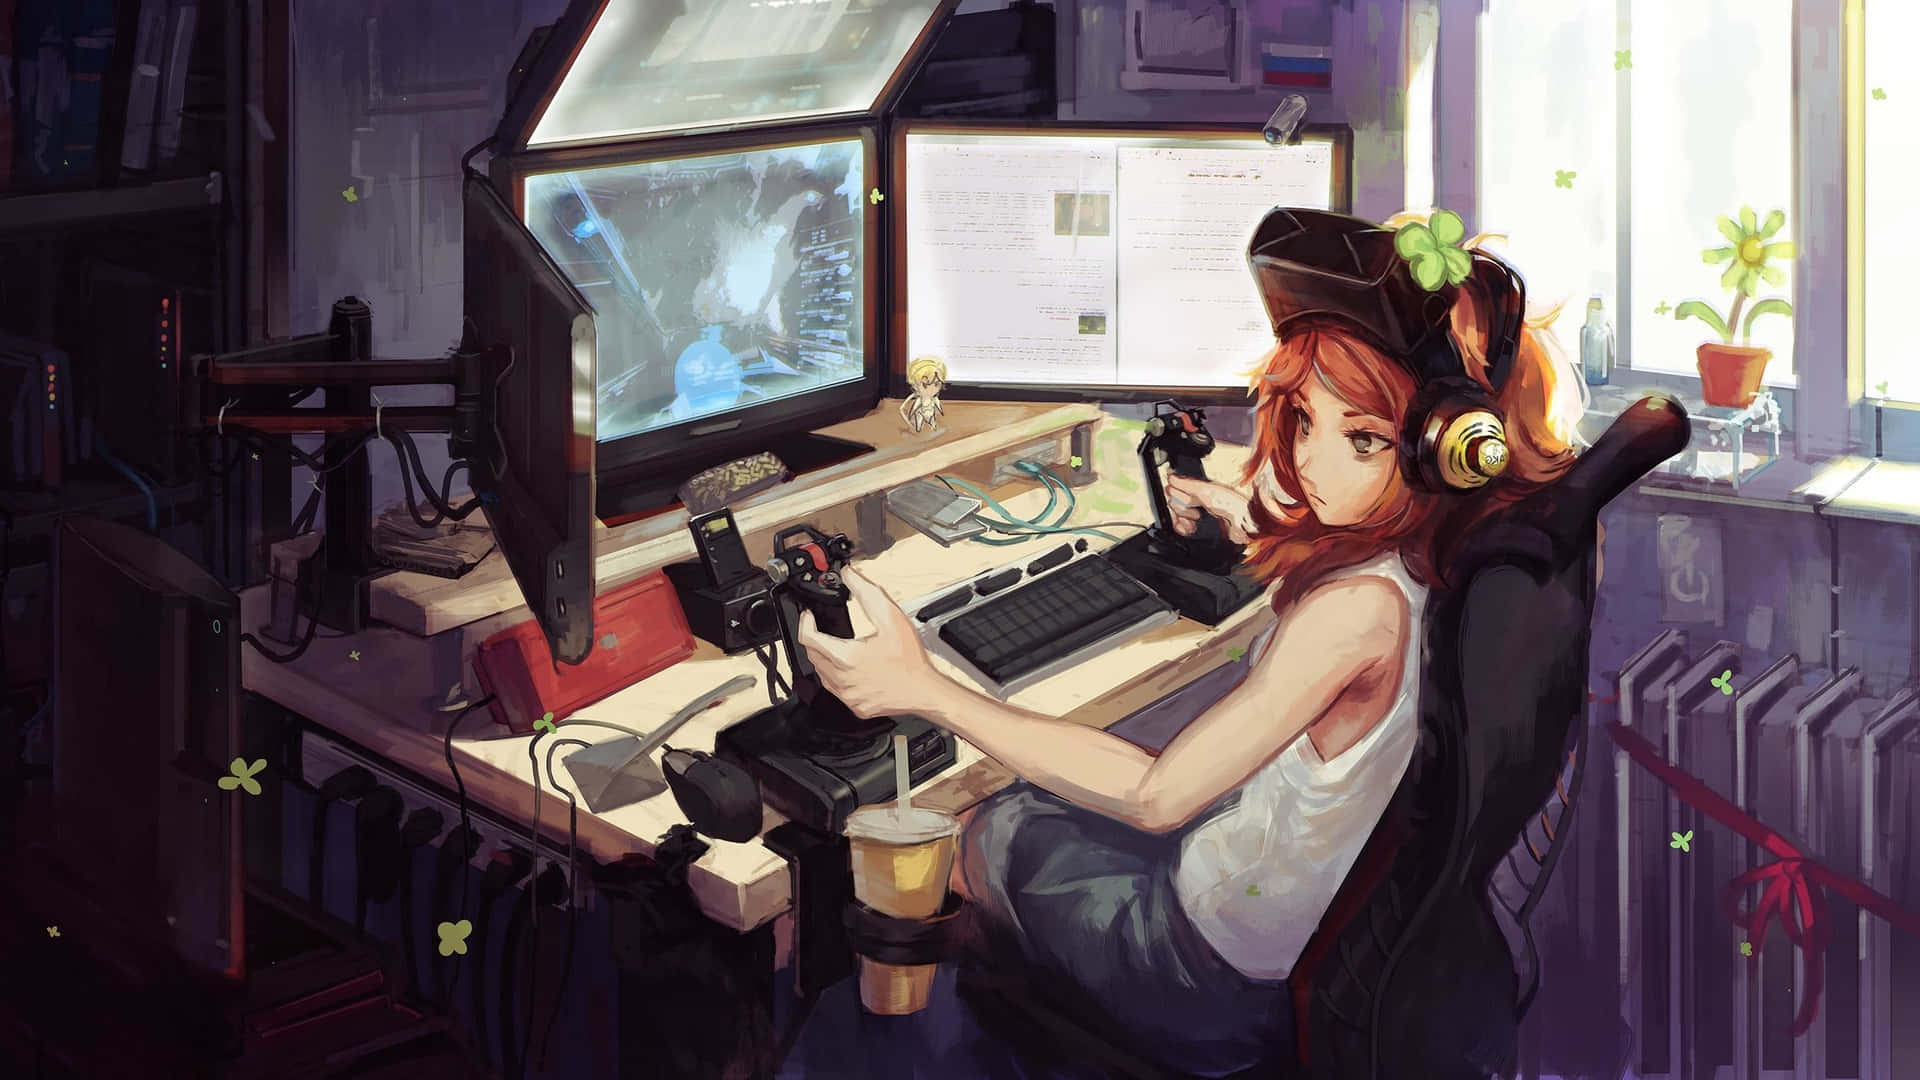 Explore the World of Gaming with this Kawaii Girl! Wallpaper